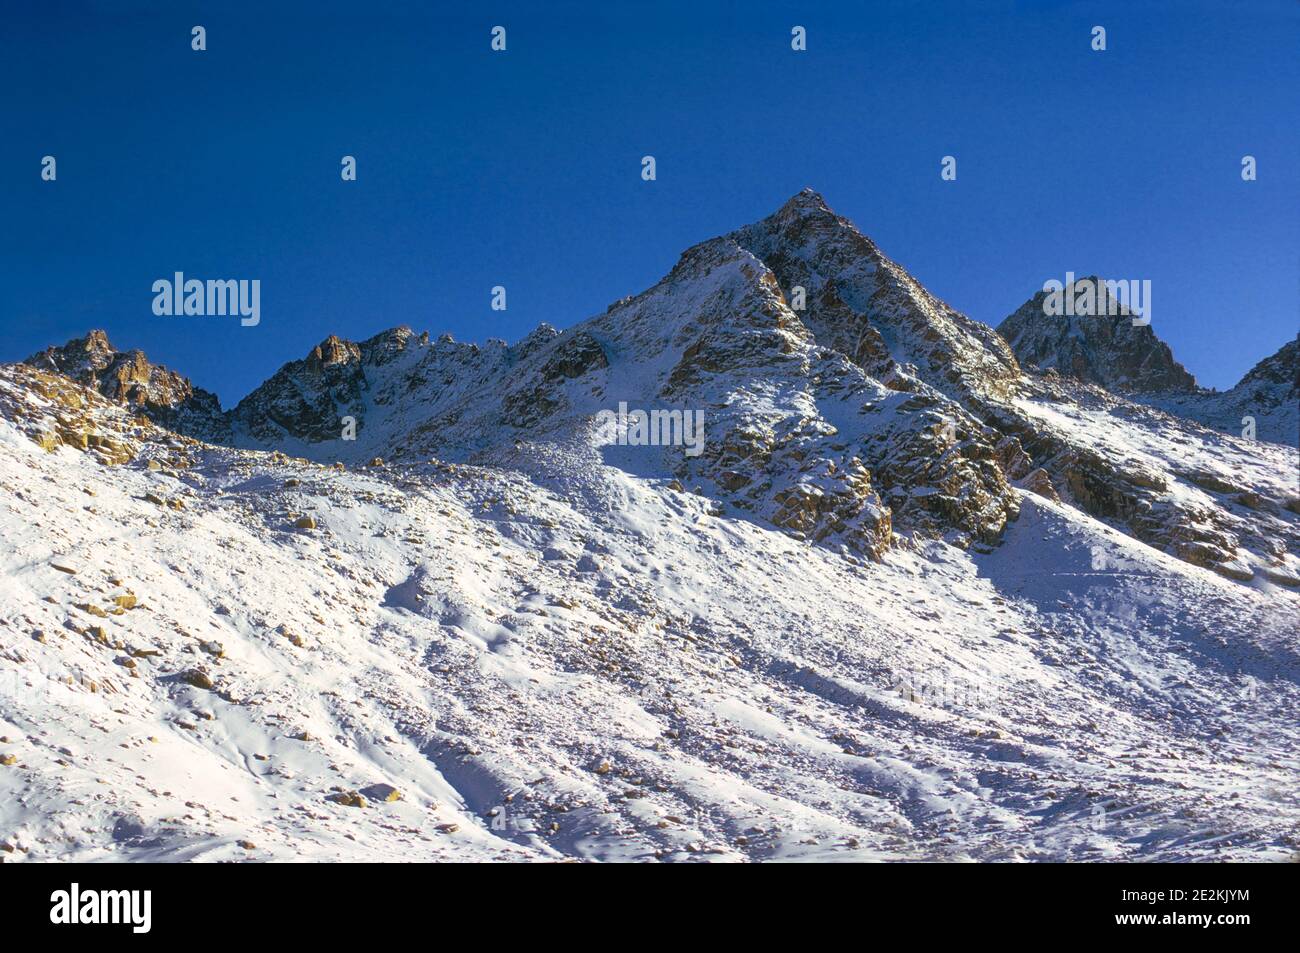 Snow capped mountains Hindu Kush Central Afghanistan Stock Photo